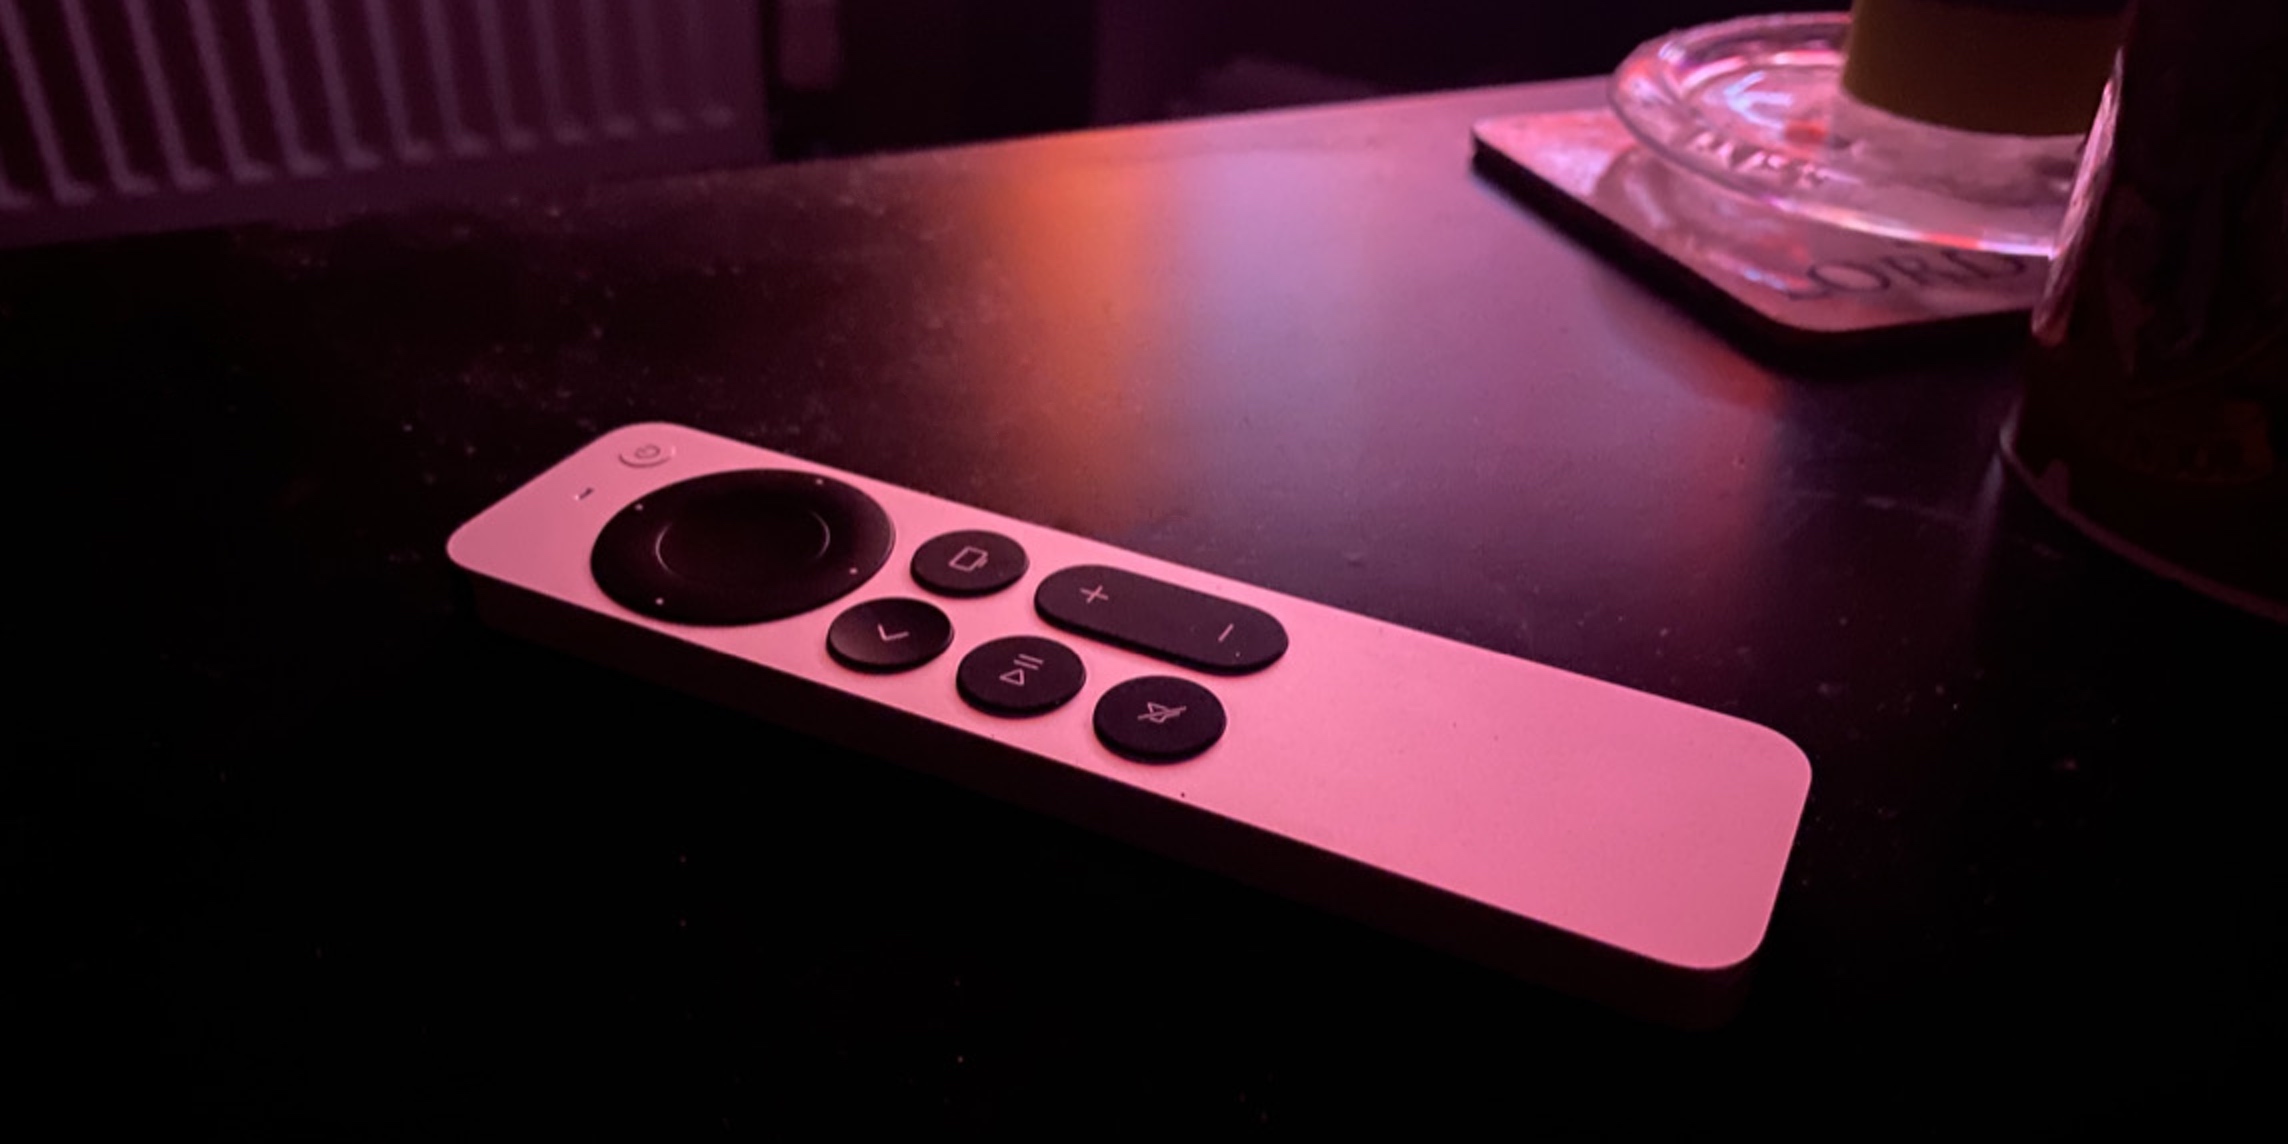 The new Apple TV remote makes everyone happy - 9to5Mac